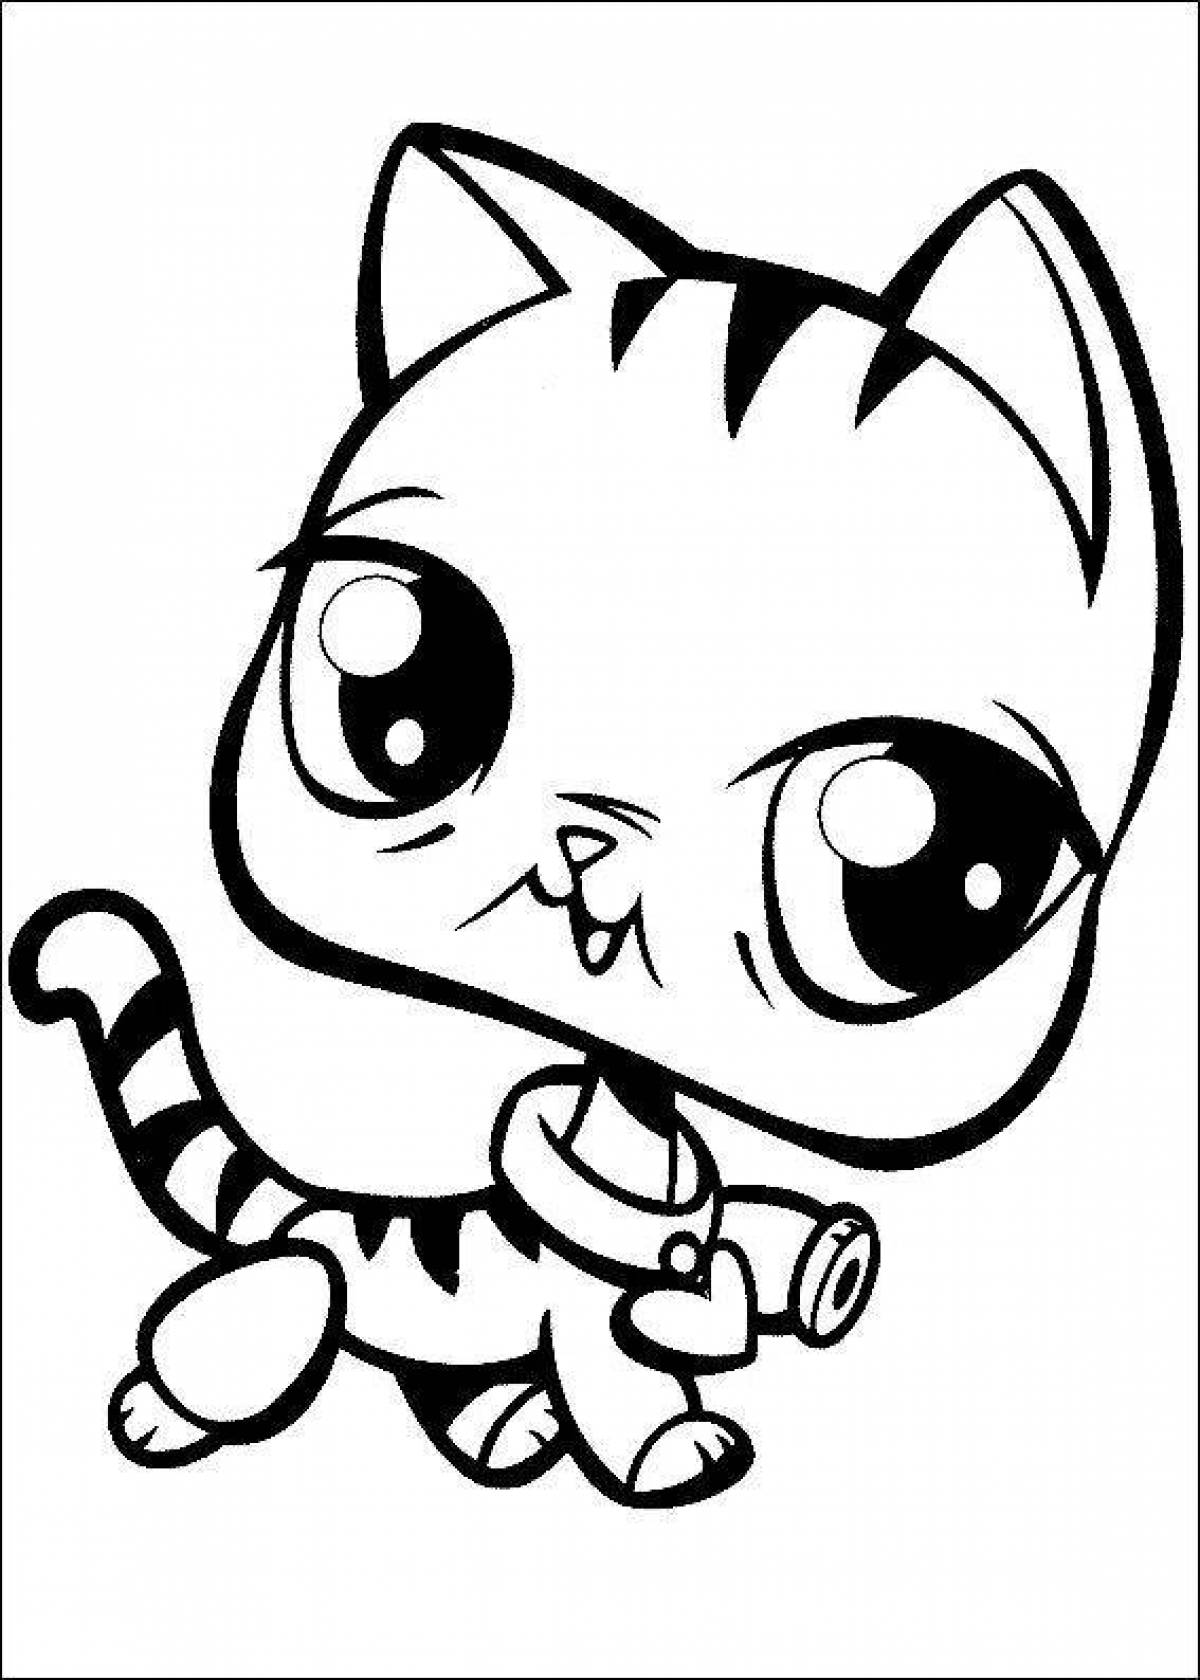 Snuggly cute cat coloring pages